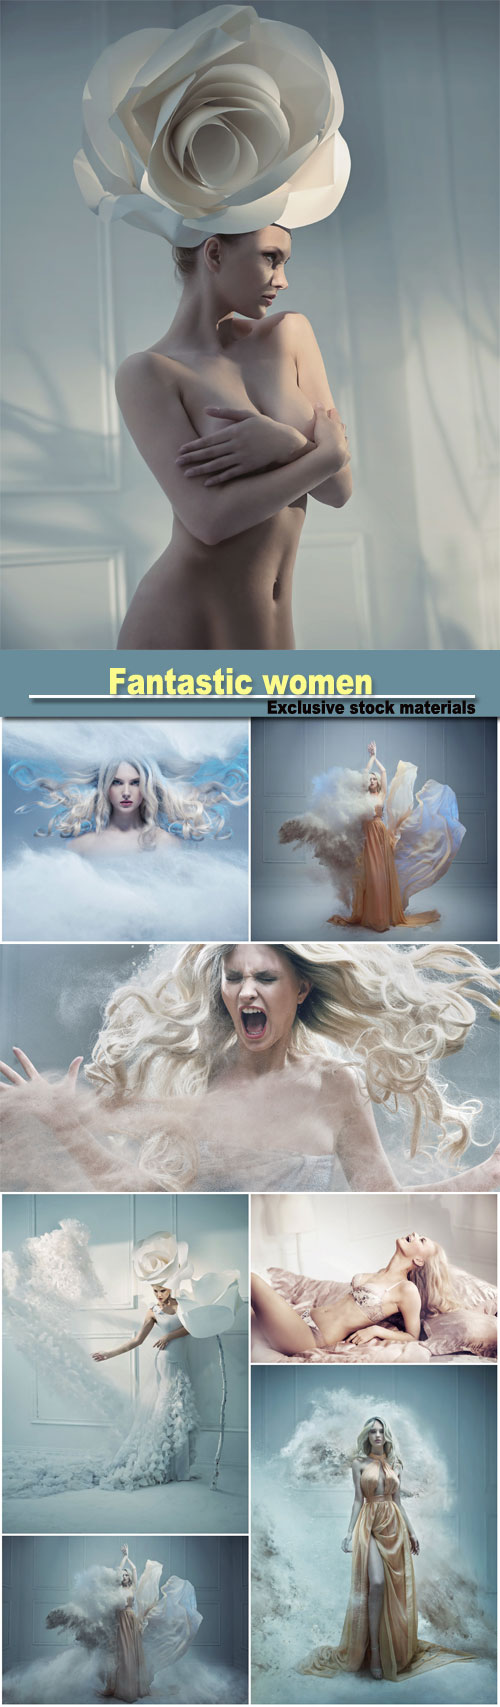 Fantastic women in different images